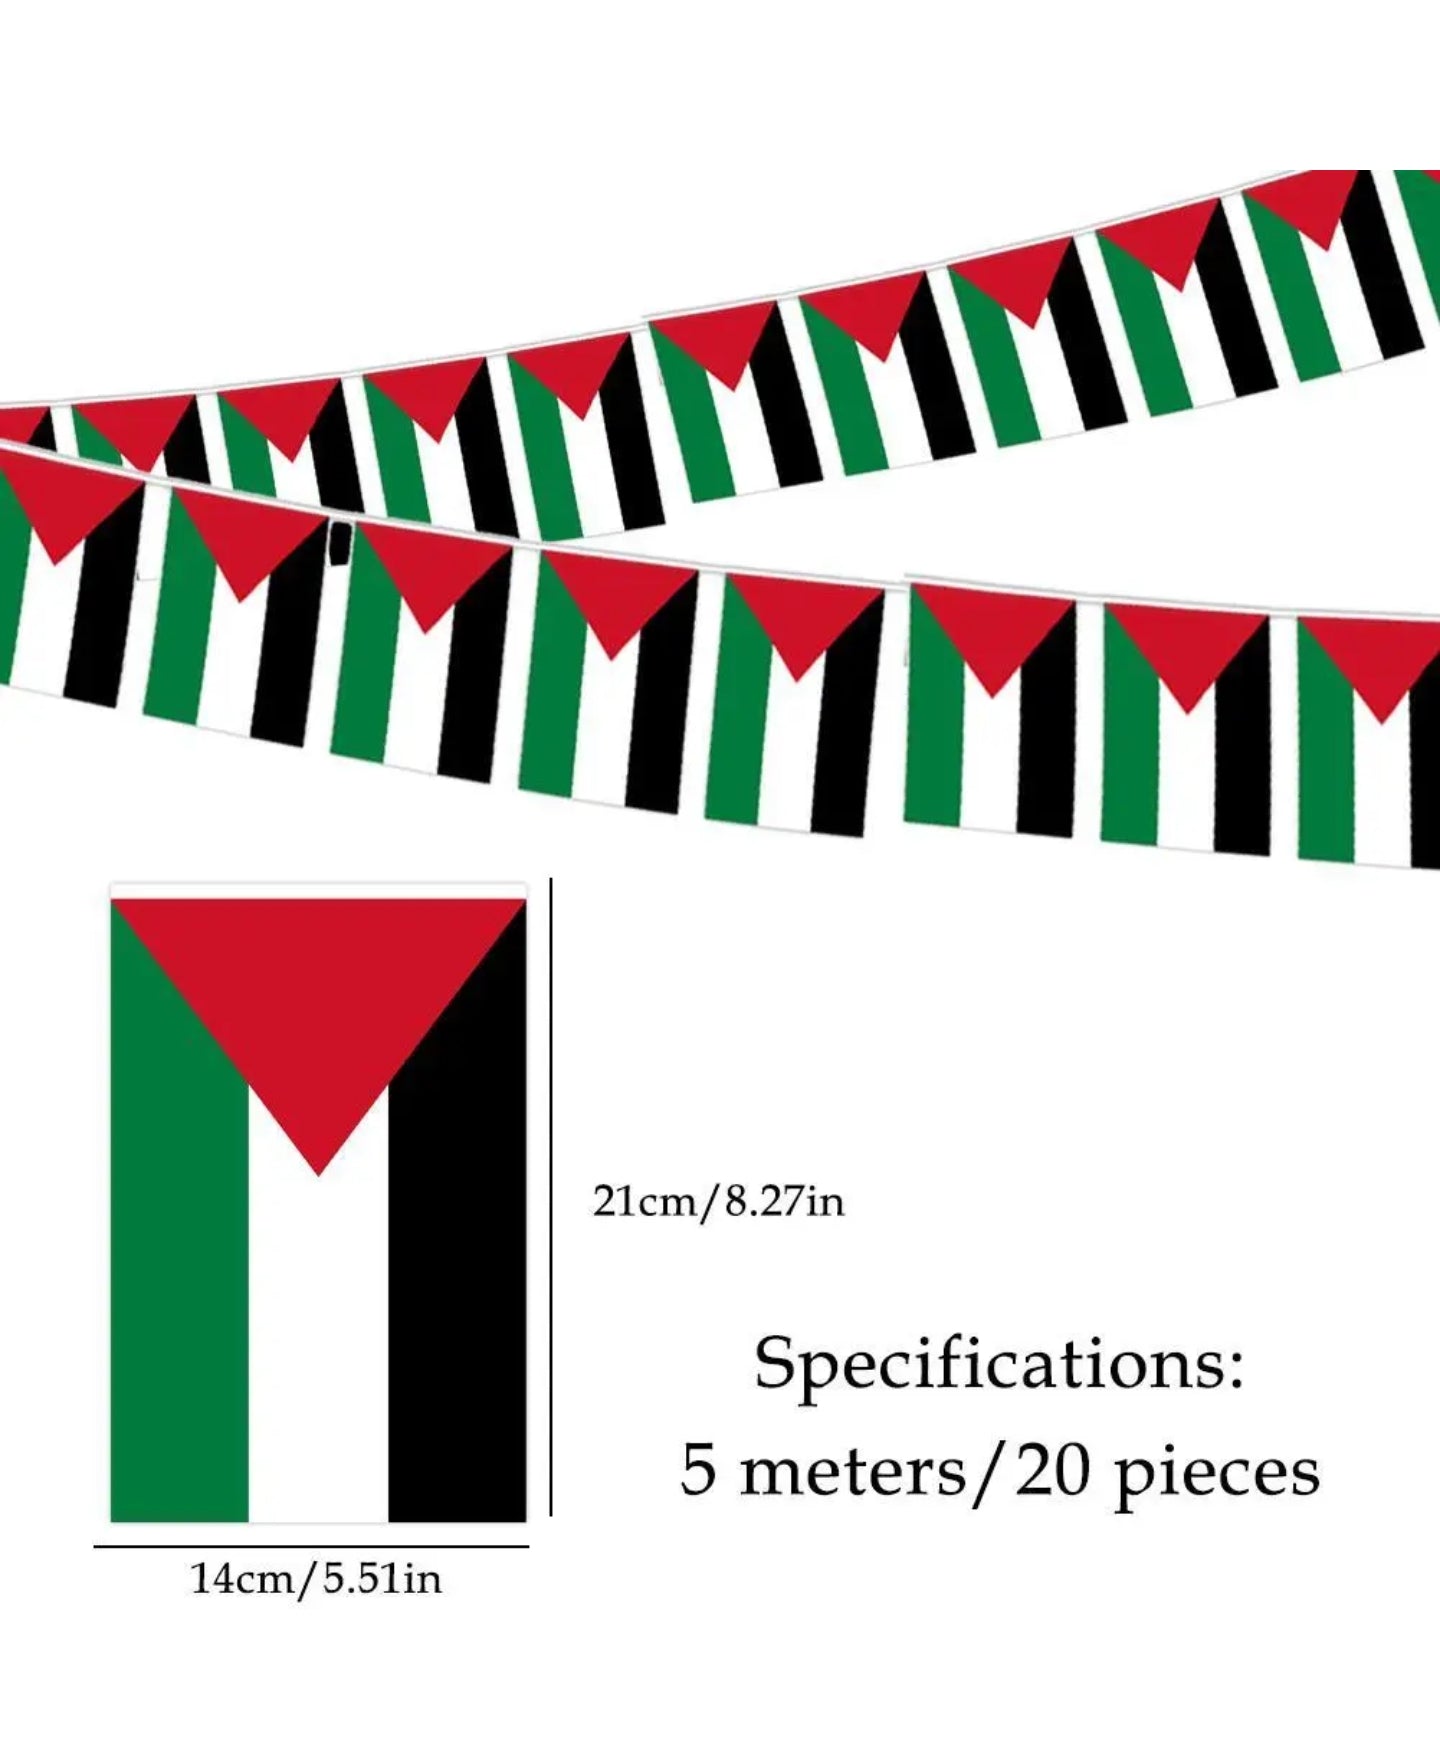 Elevate your celebrations with our Palestine Bunting Flags from Hikmah Boutique. This set of 20 flags, each measuring 21cm x 14cm, spans 5 meters, offering a vivid representation of Palestinian heritage. Crafted for authenticity and durability, make a powerful statement at your events—order now!